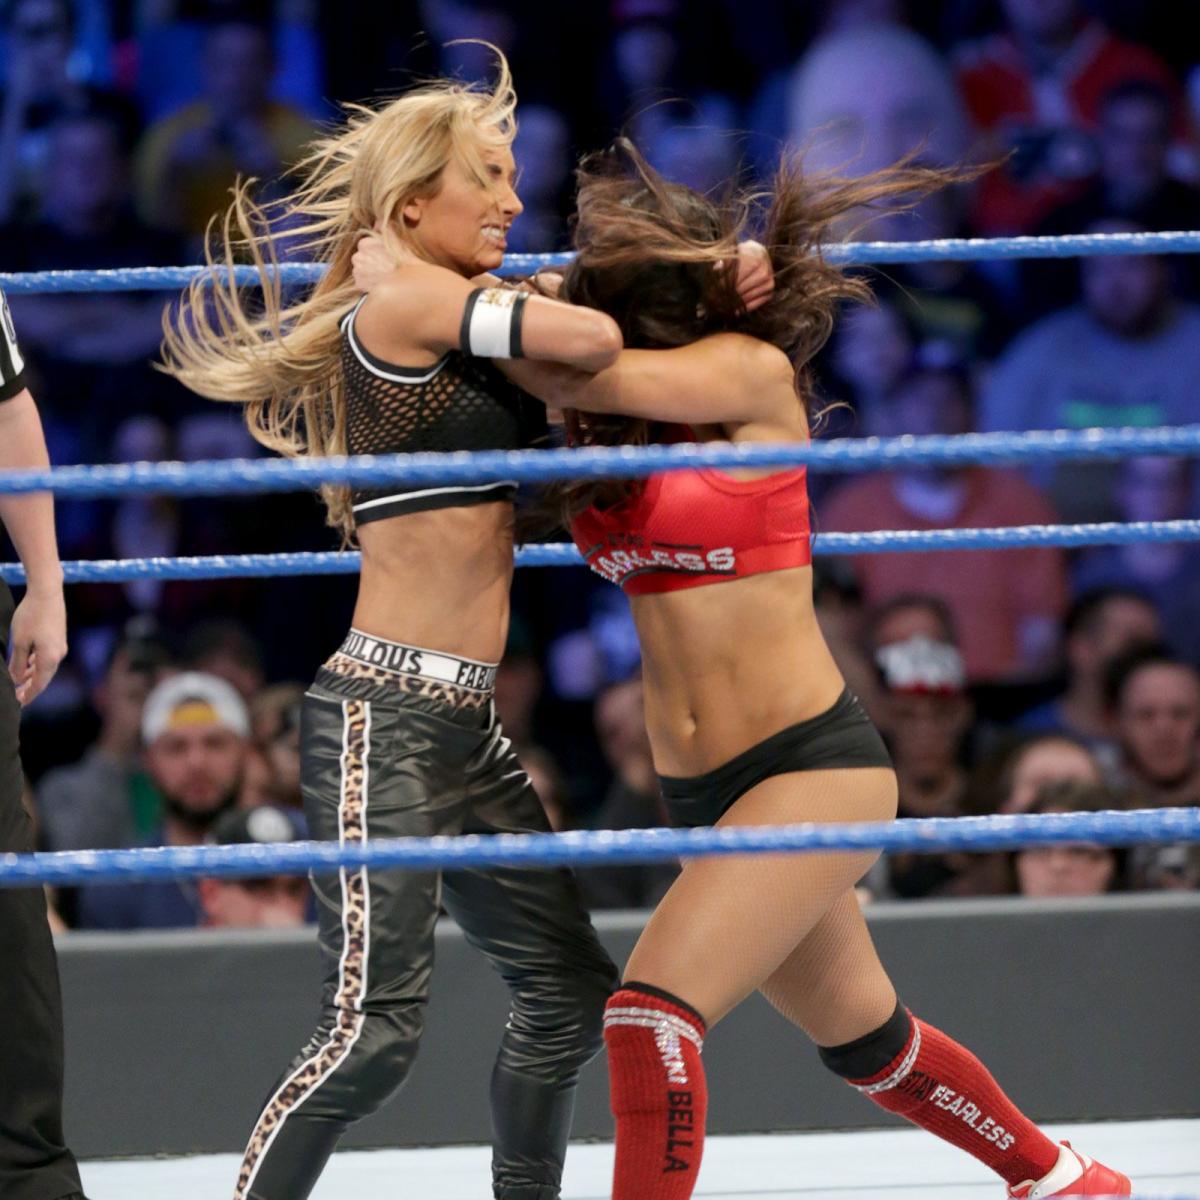 RT @hooksbitch: remember the nikki bella and carmella fued ? https://t.co/lee2cj6nQO